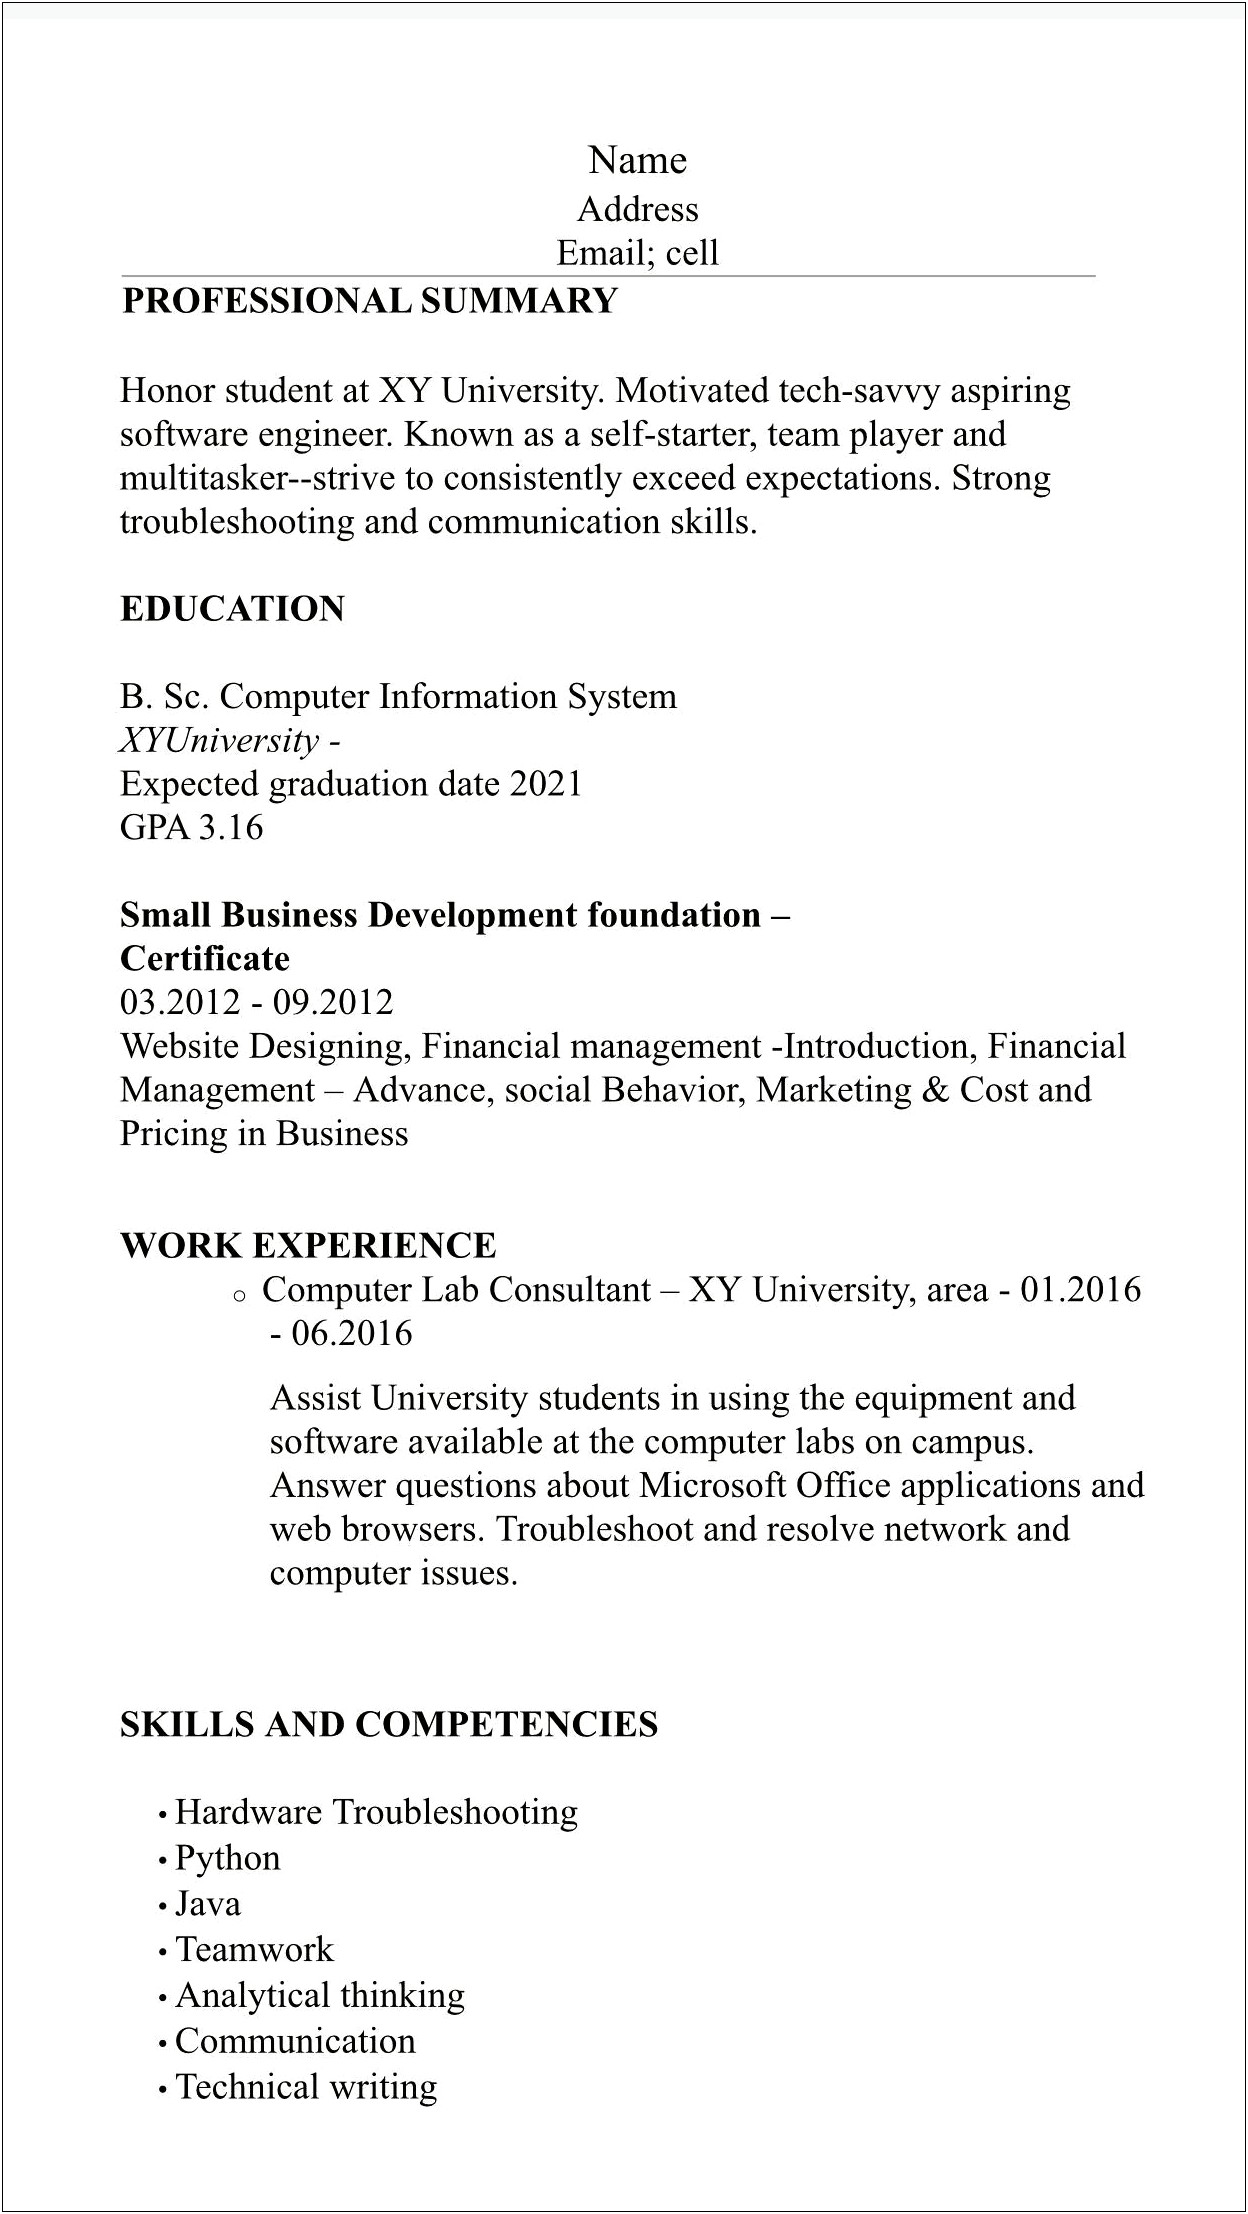 Resume Summary For Someone Who Is Tech Saavy